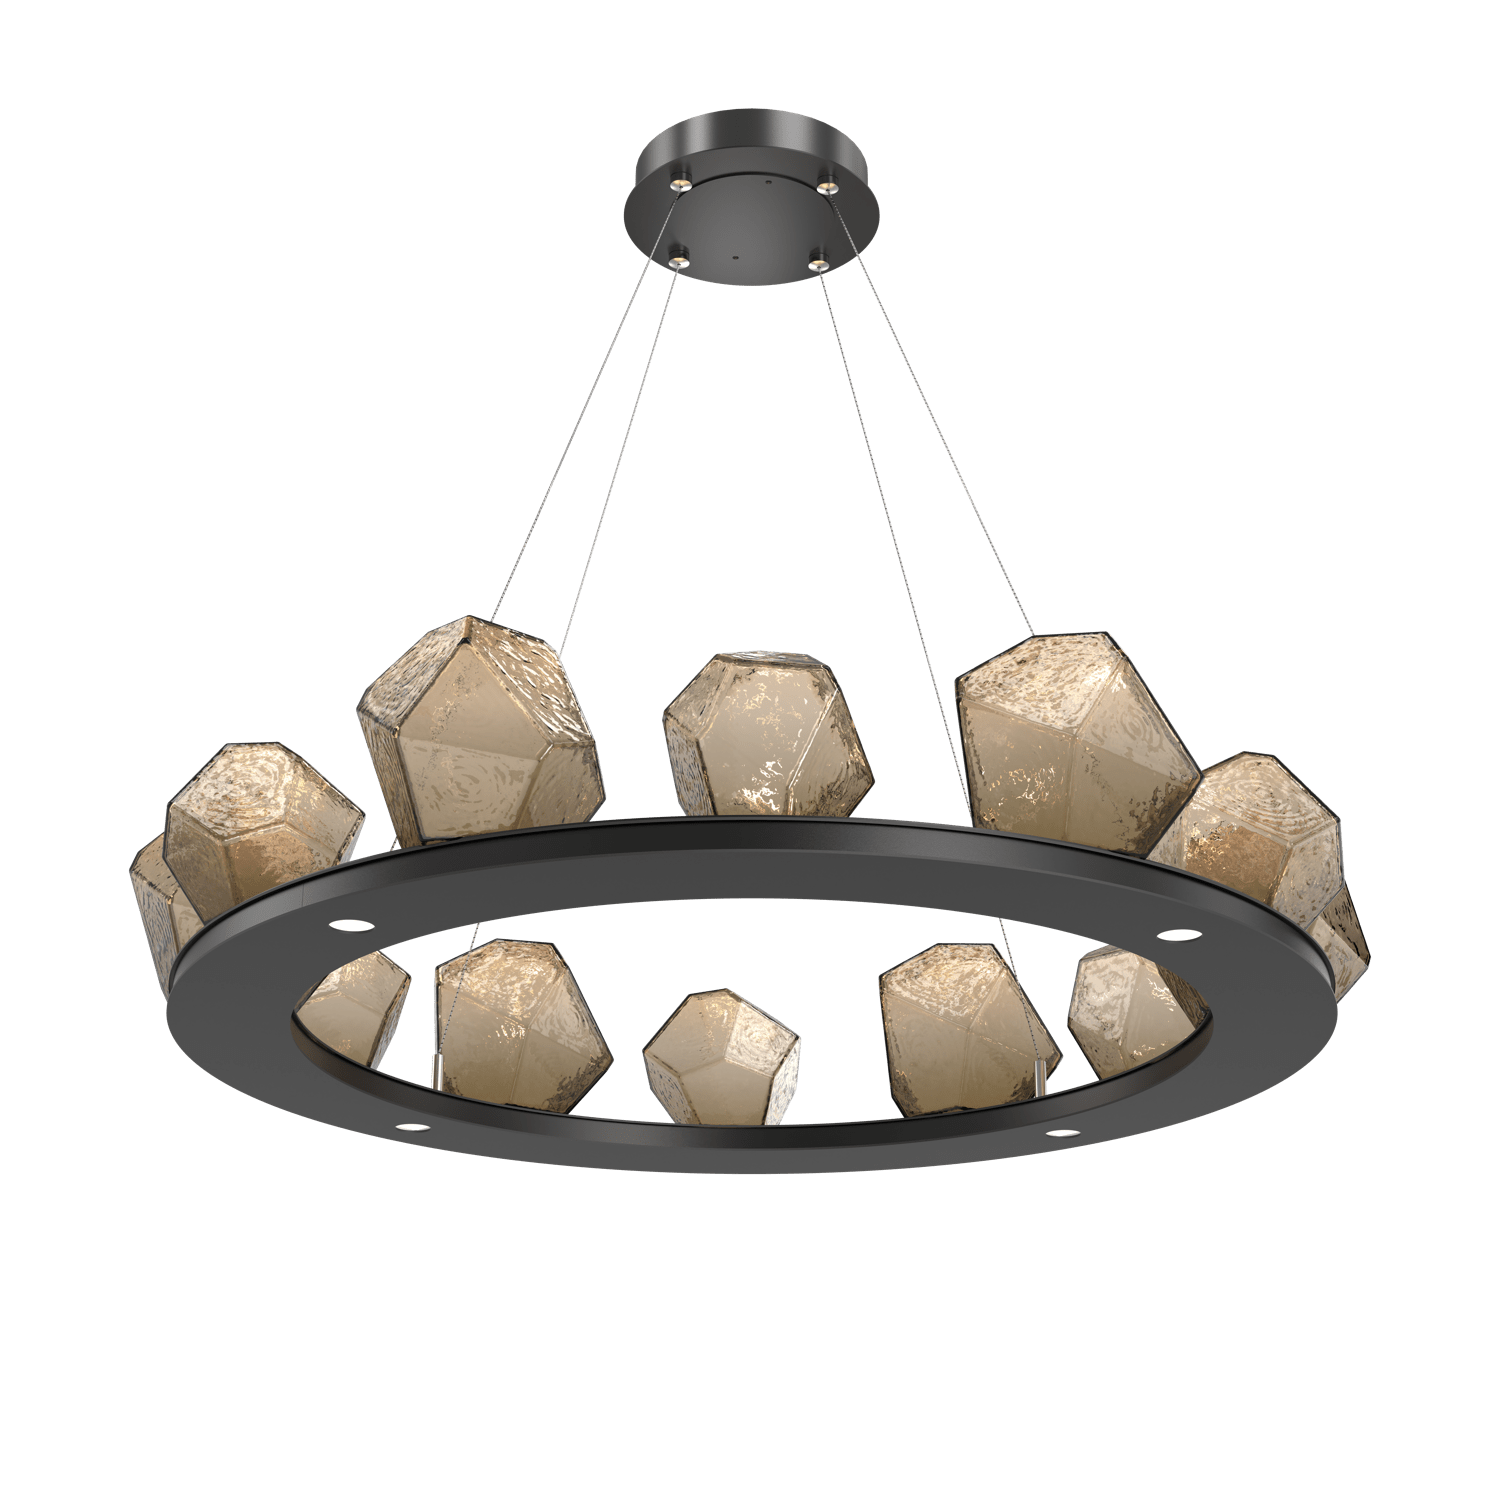 CHB0039-0C-MB-B-Hammerton-Studio-Gem-37-inch-ring-chandelier-with-matte-black-finish-and-bronze-blown-glass-shades-and-LED-lamping